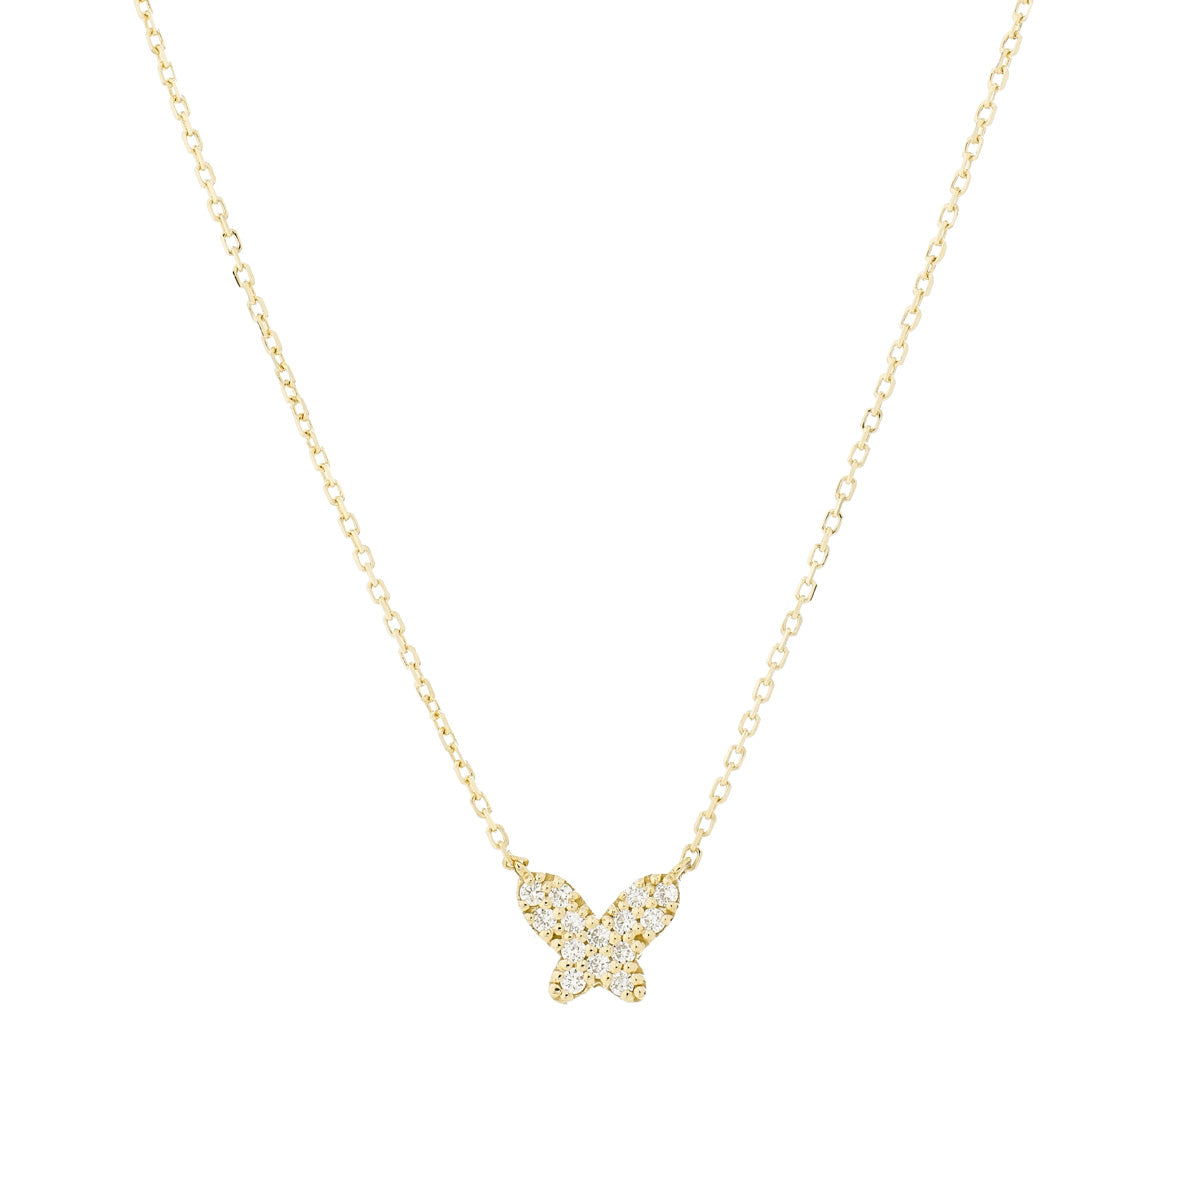 18k sterling gold and diamond Butterfly necklace